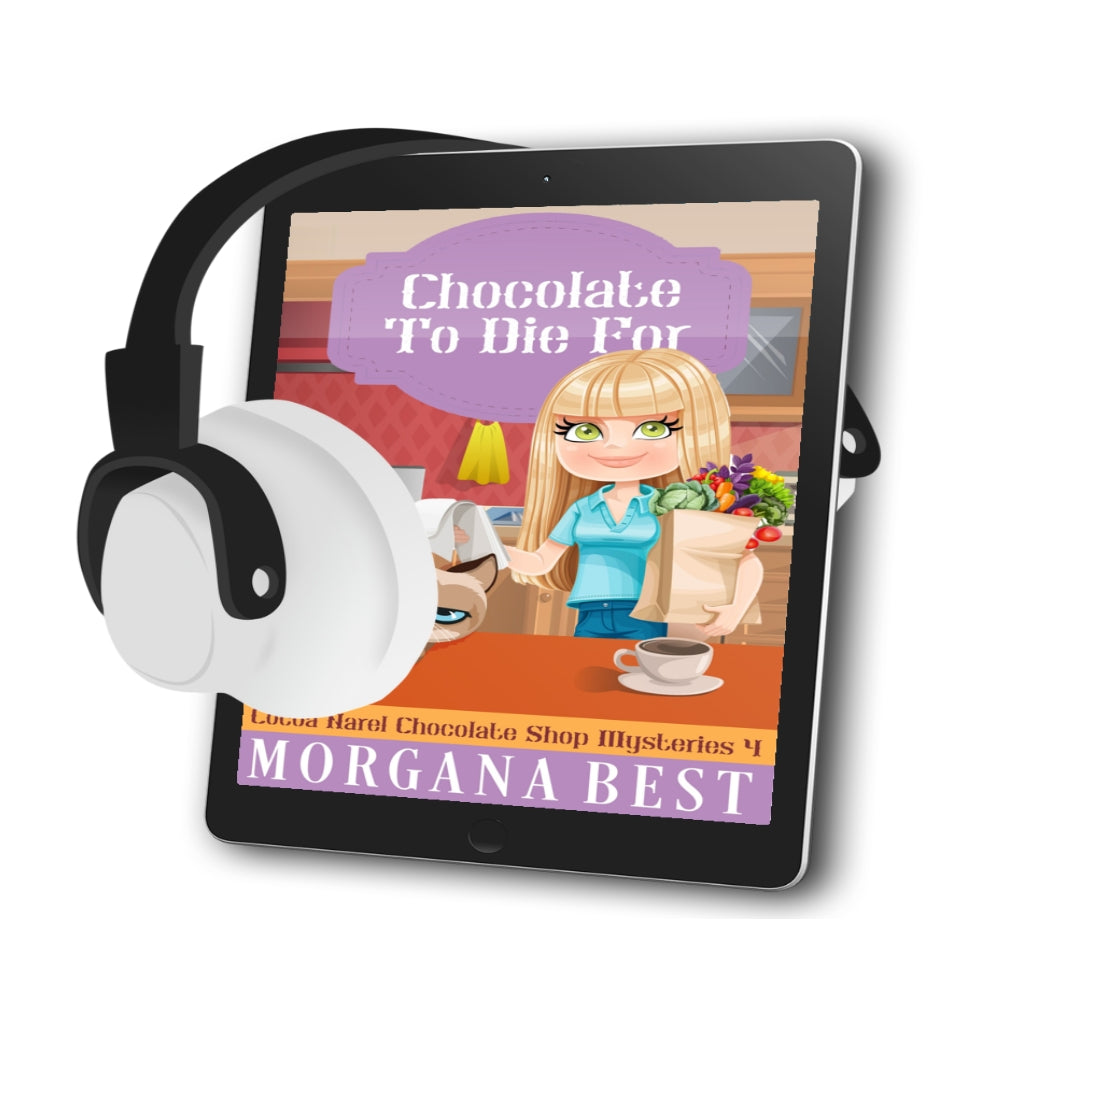 Chocolate to Die For AUDIOBOOK cozy mystery by morgana best